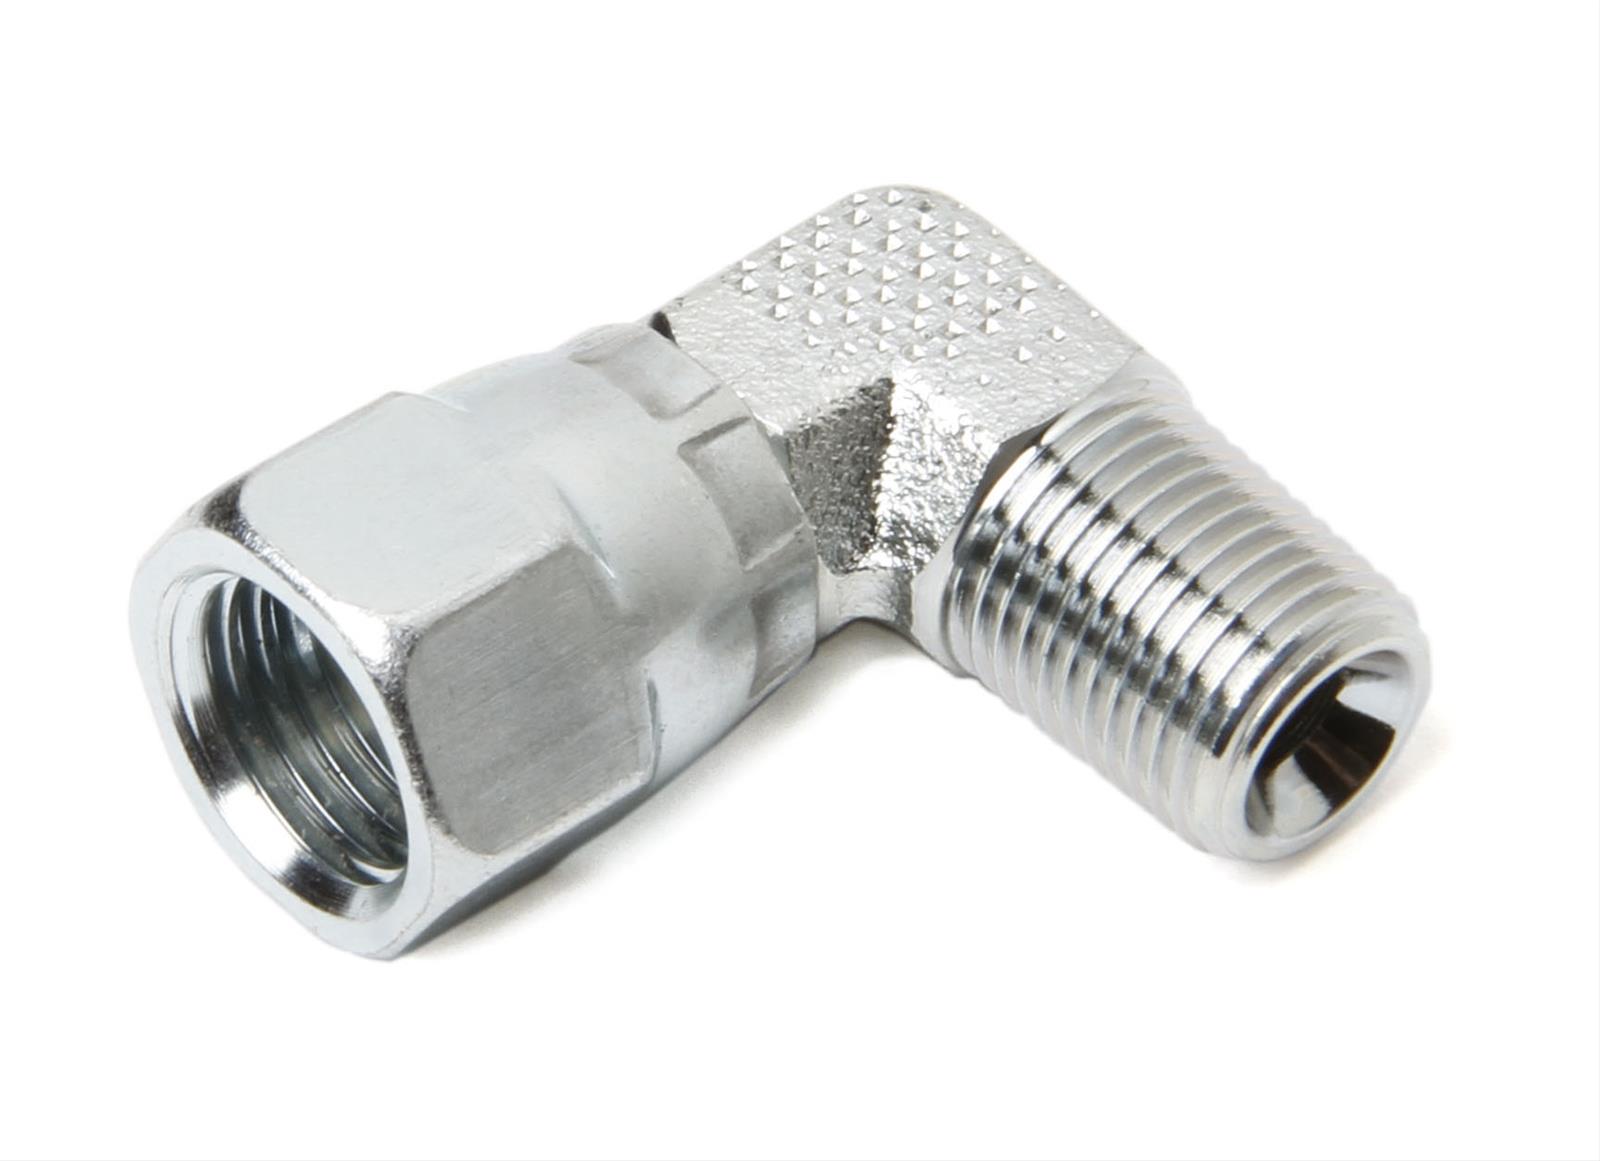 www.meinvoyager.de - NOS -ADAPTERS/FITTINGS